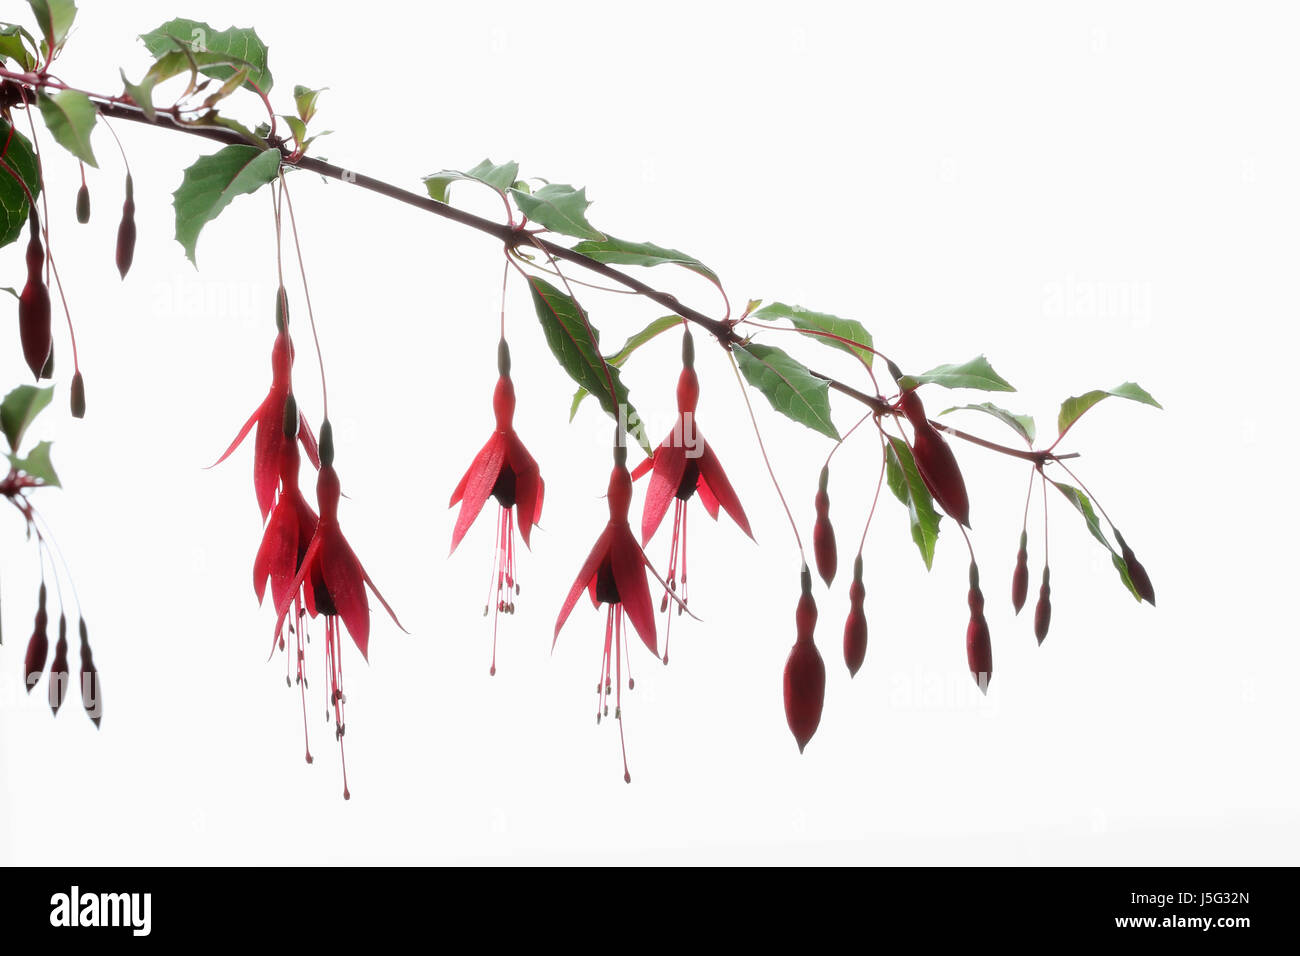 Fuchsia, Hardy fuchsia, Fuchsia magellanica, Studio shot of several red flowers  and flower buds hanging from a stem. Stock Photo